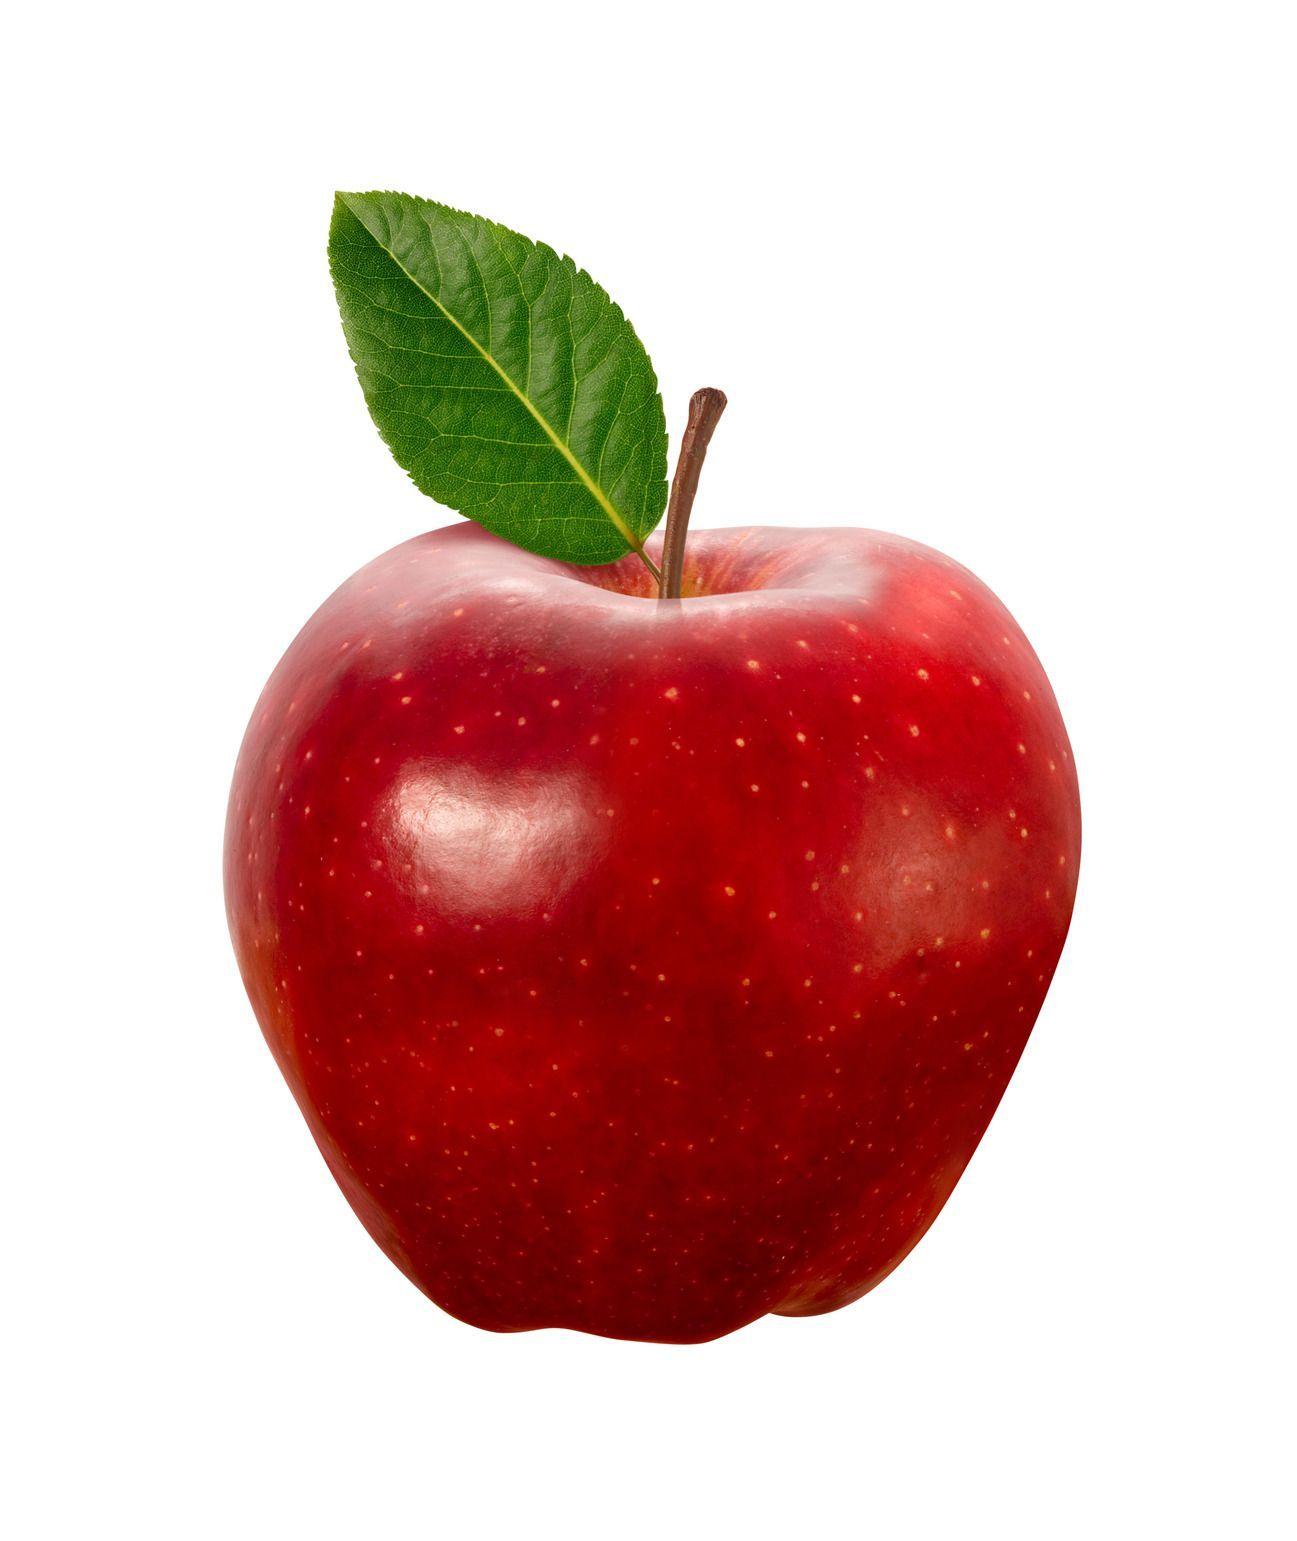 Apple Picture Find best latest Apple Picture for your PC desktop